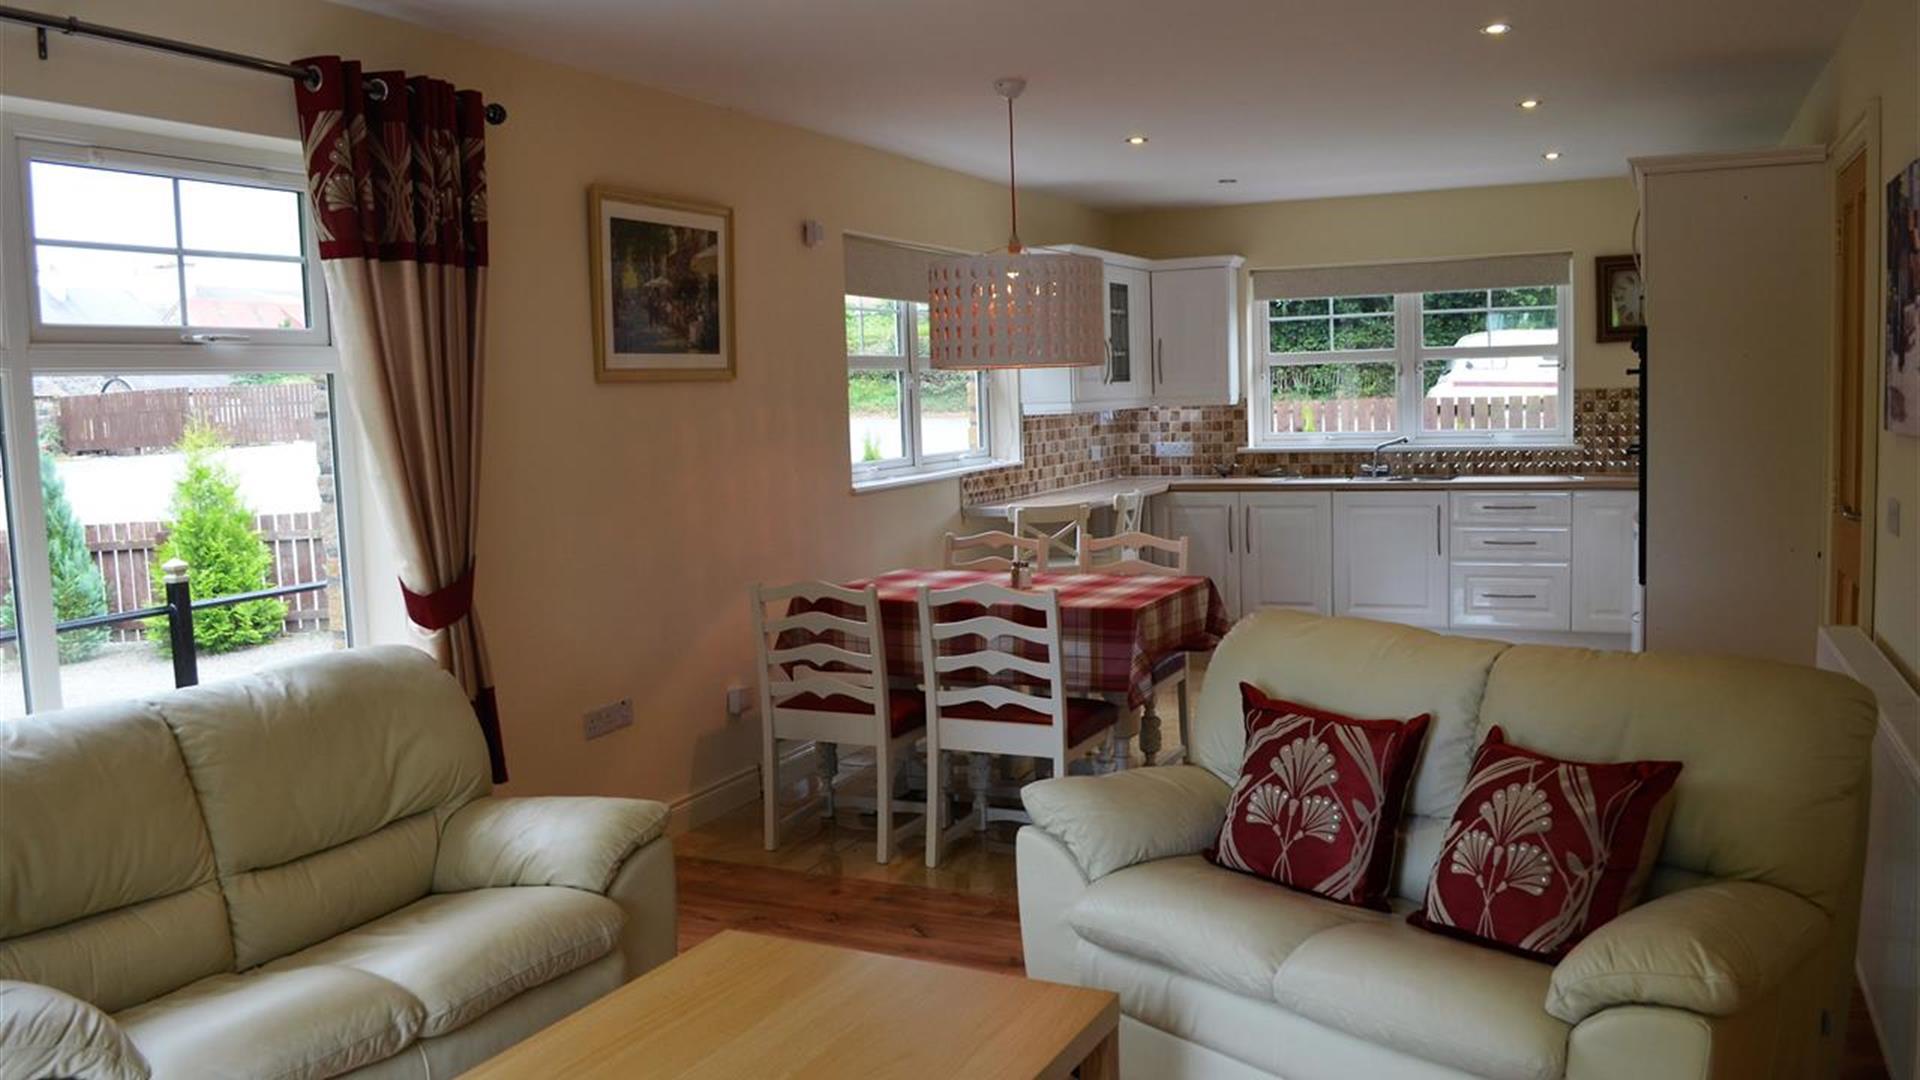 Open plan kitchen, dining and living area with 2 cream 2 seater sofas and dining table with 4 chairs